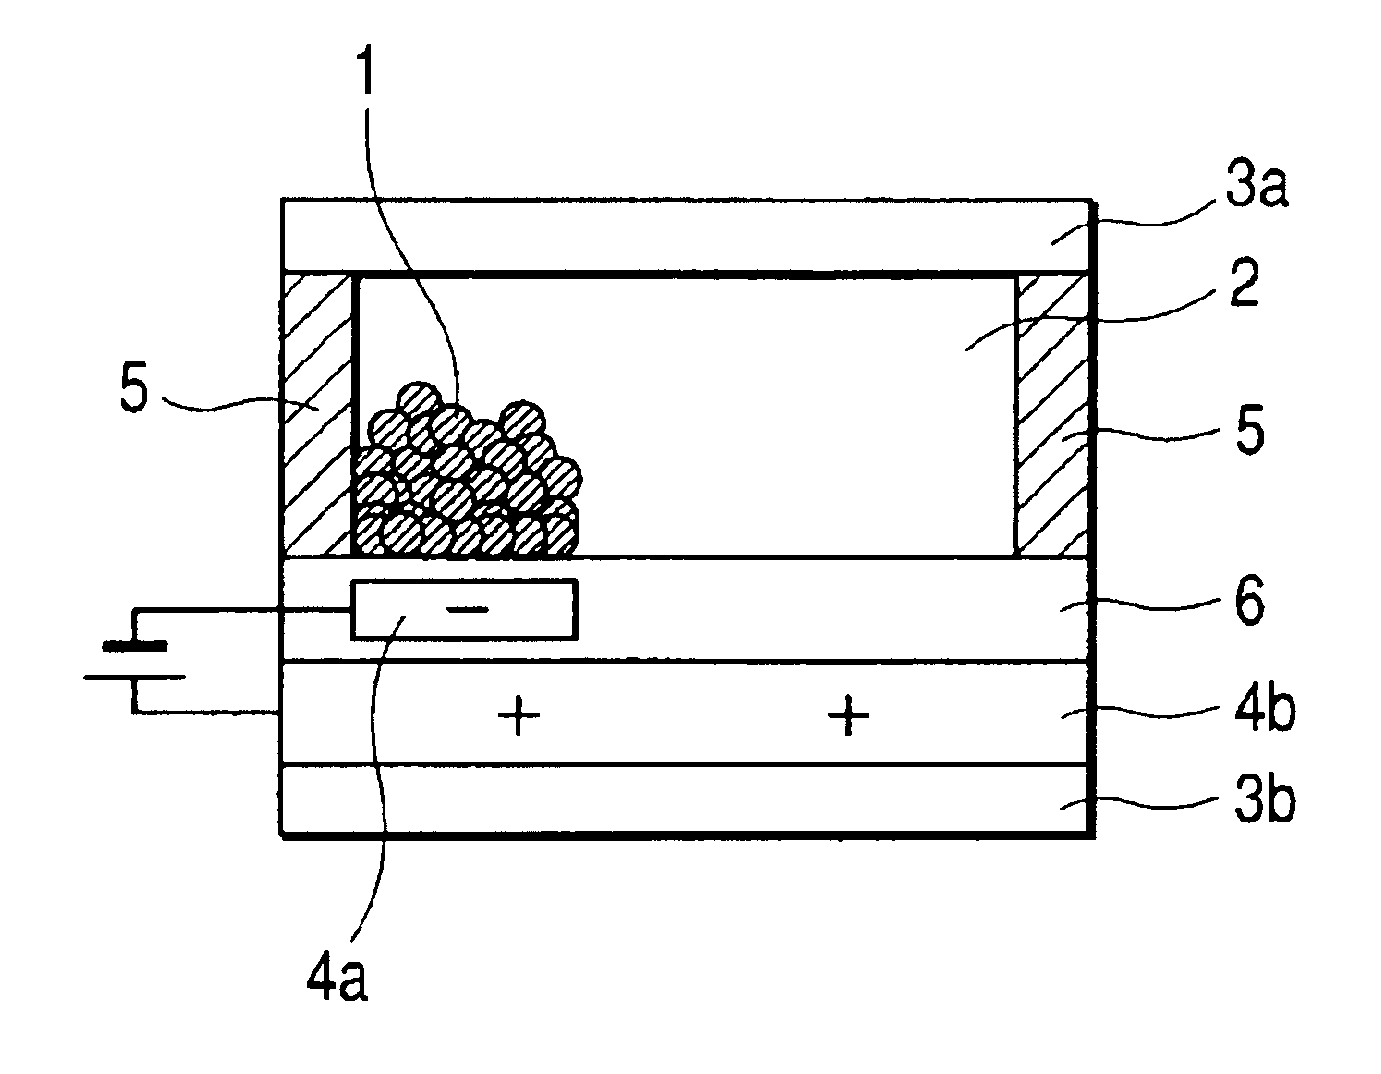 Particles for electrophoretic display and electrophoretic display apparatus using them